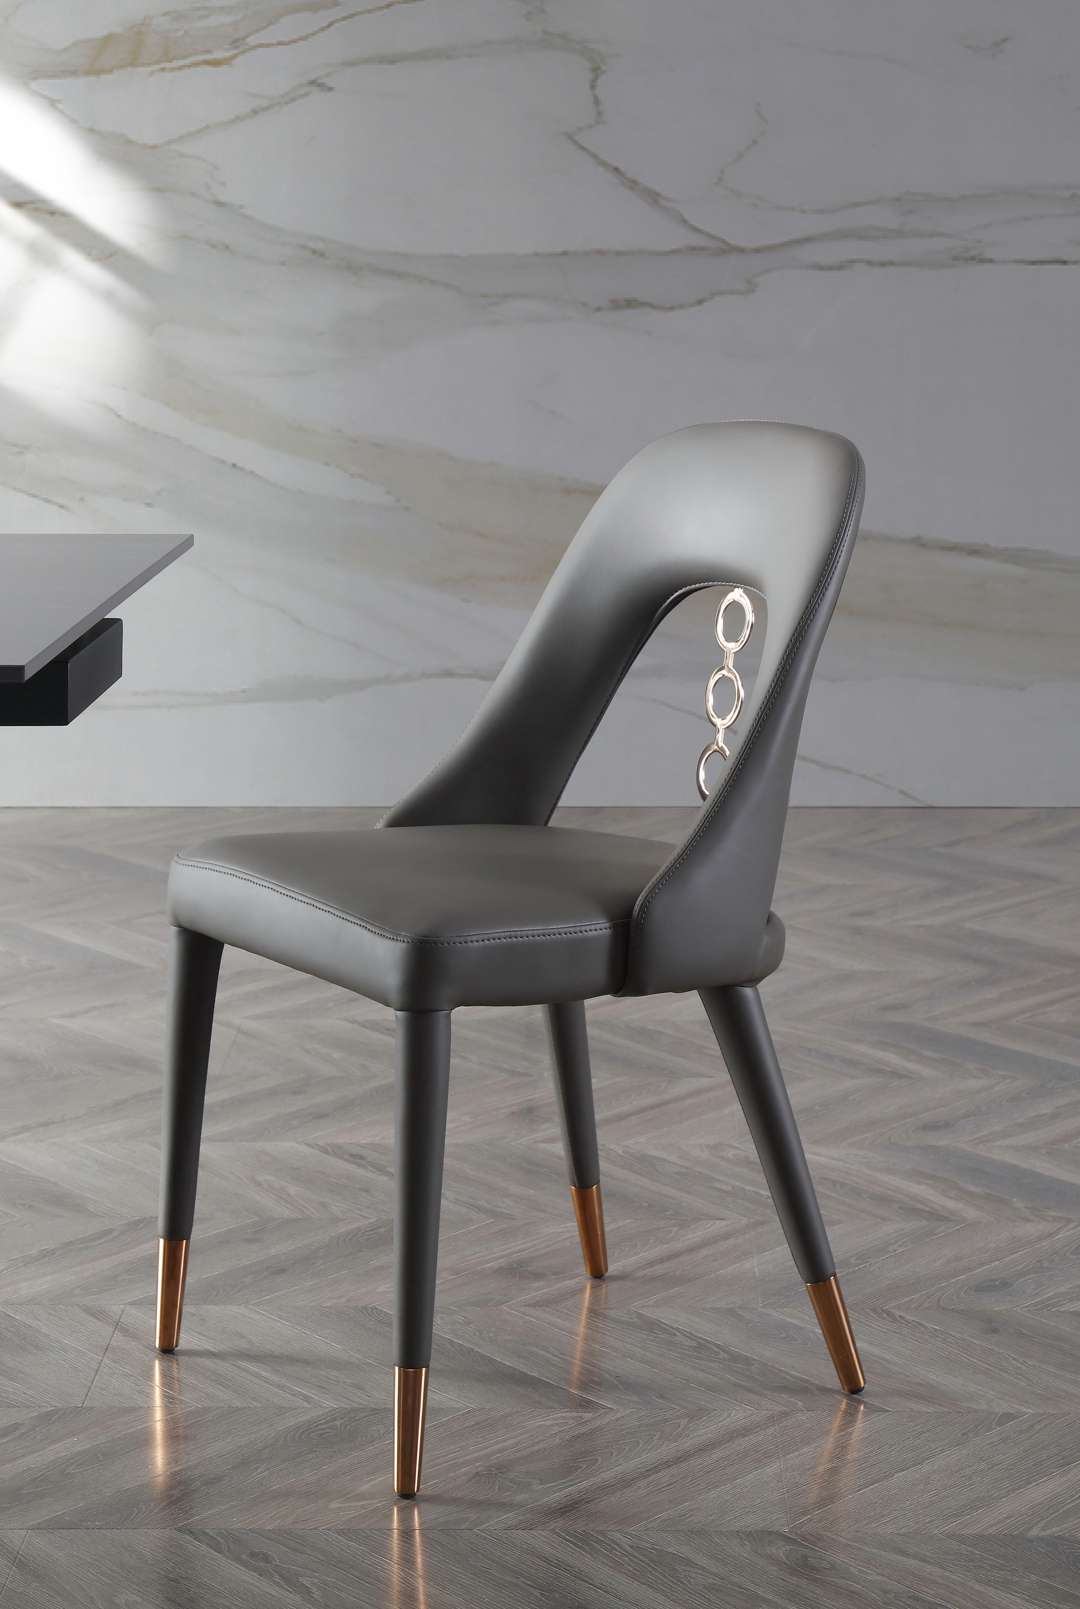 Liza Fully Upholstered Dining Chair